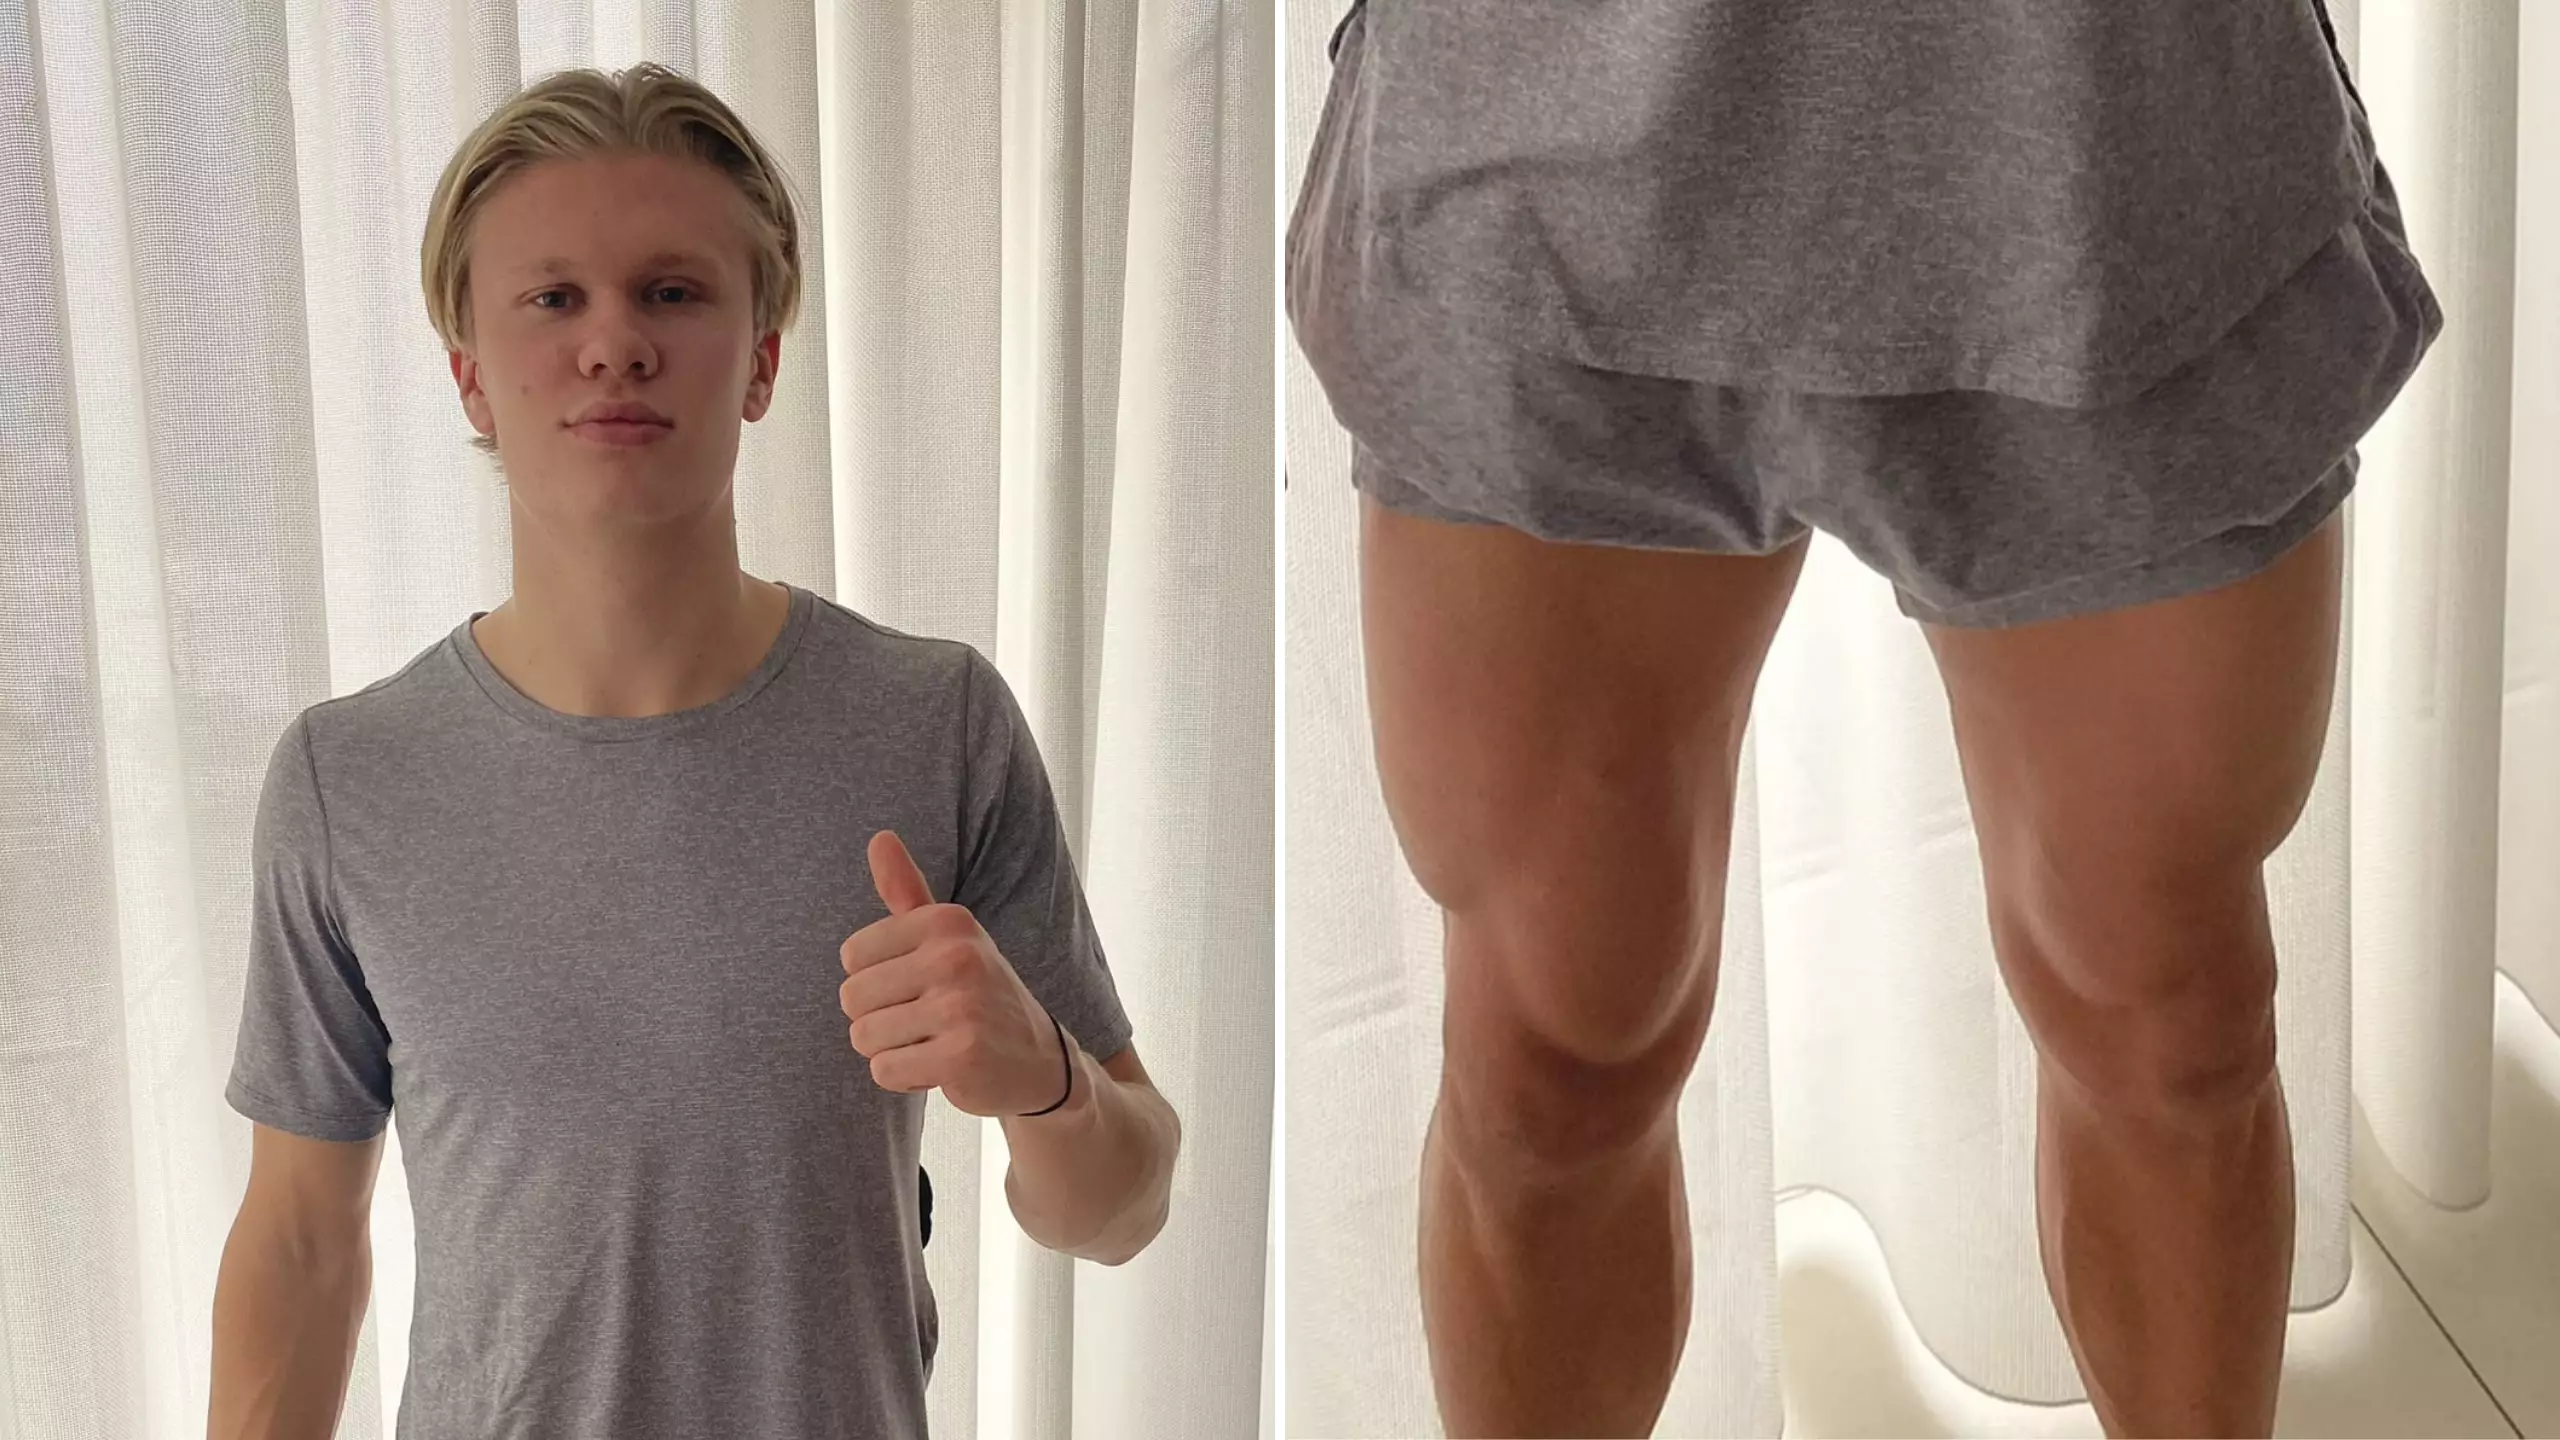 The Size Of Erling Haaland's Legs In Latest Instagram Post Are Not Normal For A 20-Year-Old